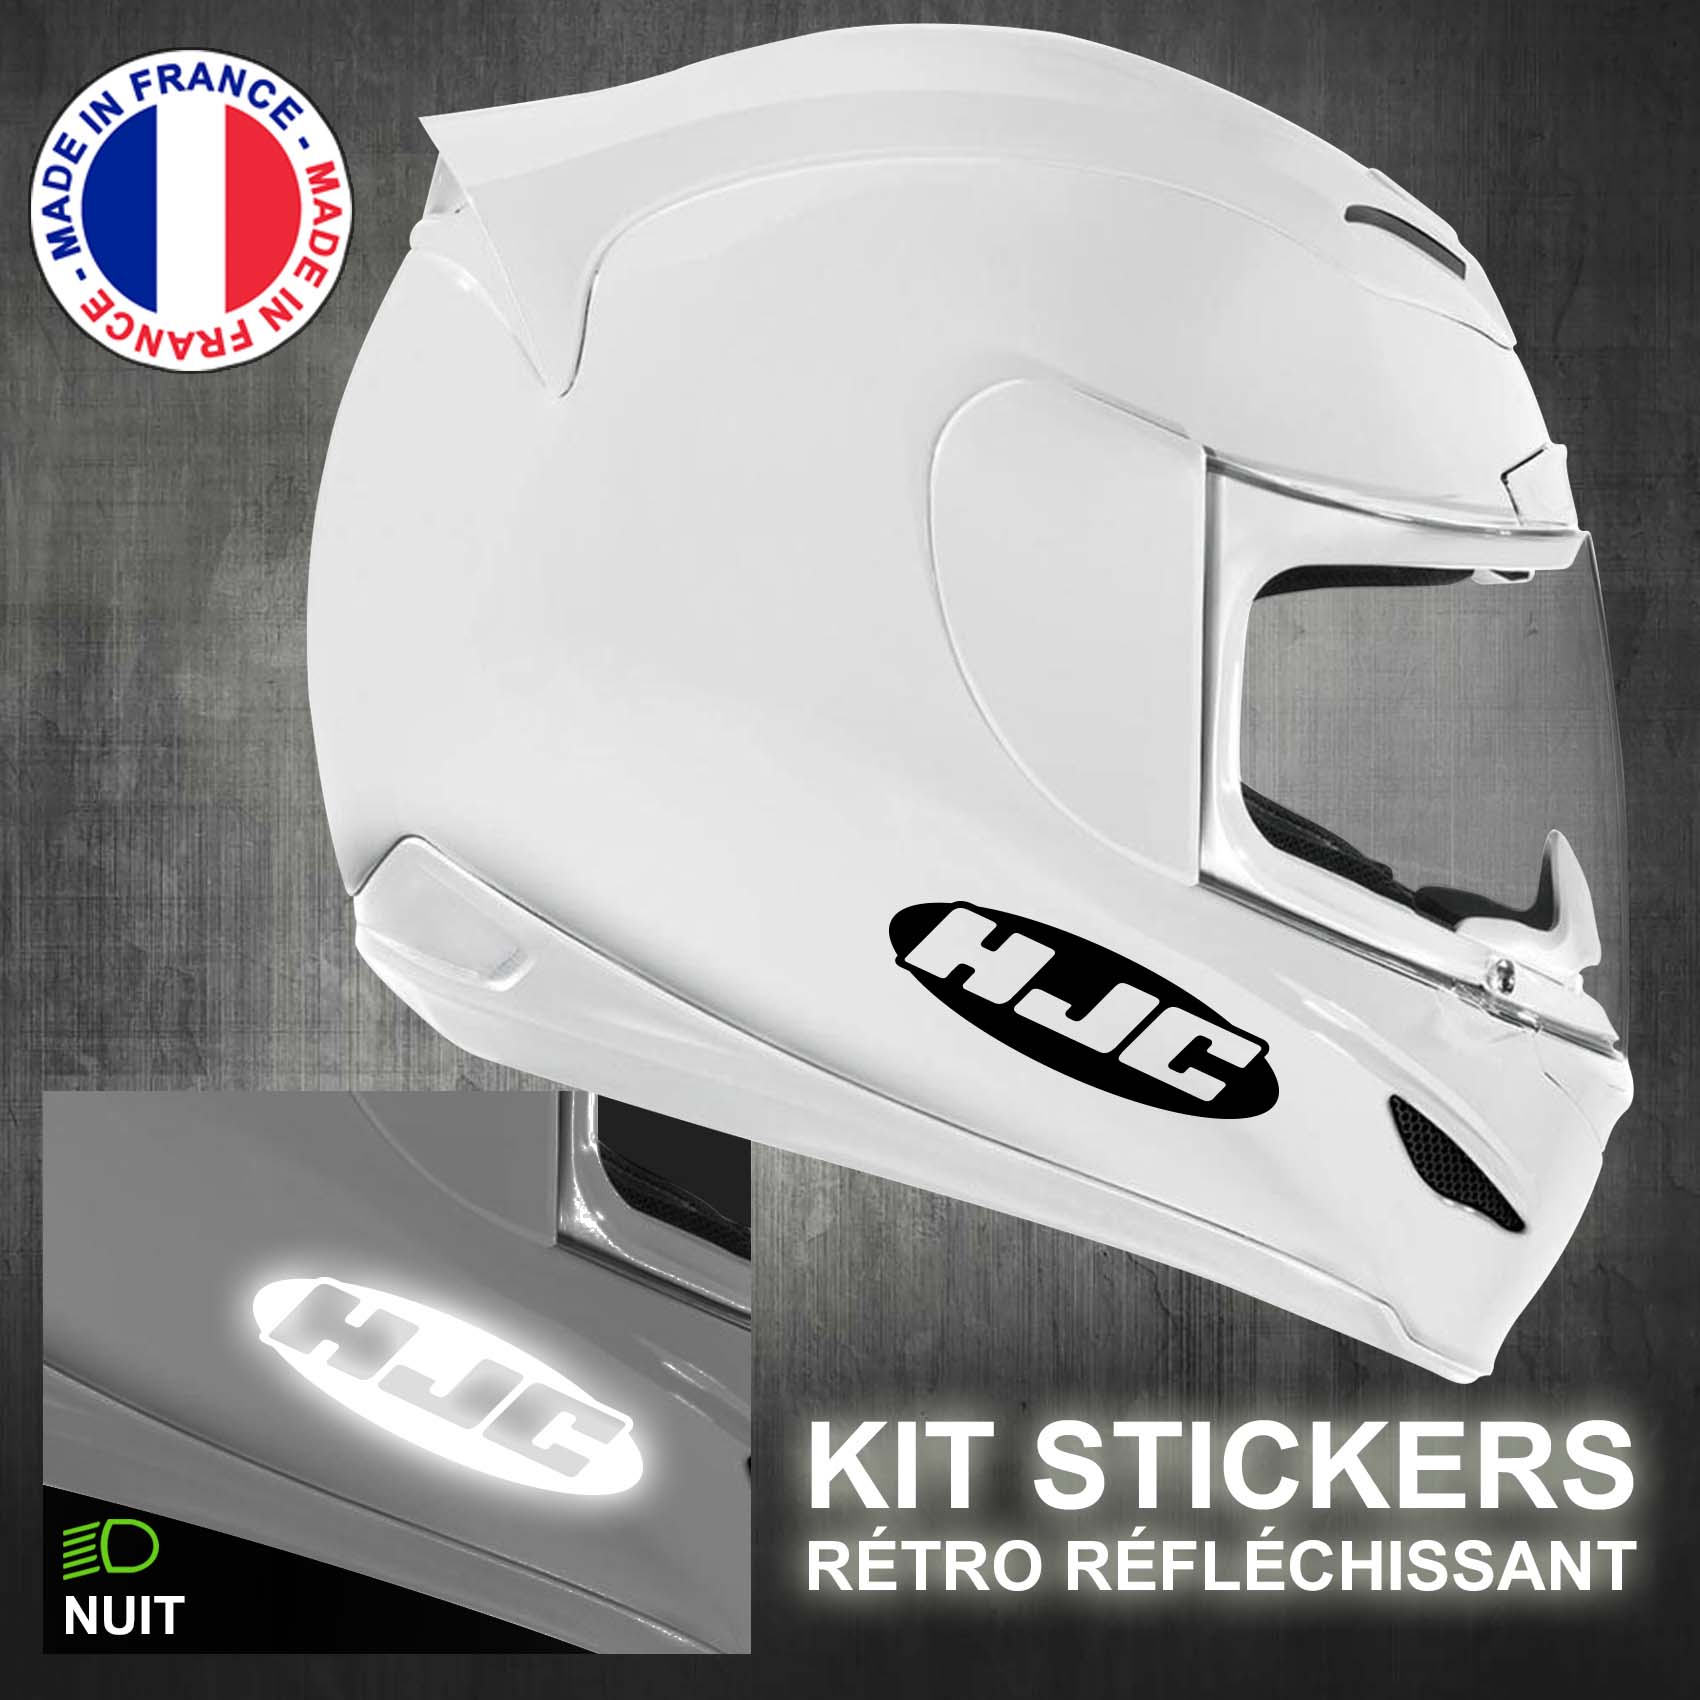 stickers-casque-moto-hjc-ref3-retro-reflechissant-autocollant-blanc-moto-velo-tuning-racing-route-sticker-casques-adhesif-scooter-nuit-securite-decals-personnalise-personnalisable-min